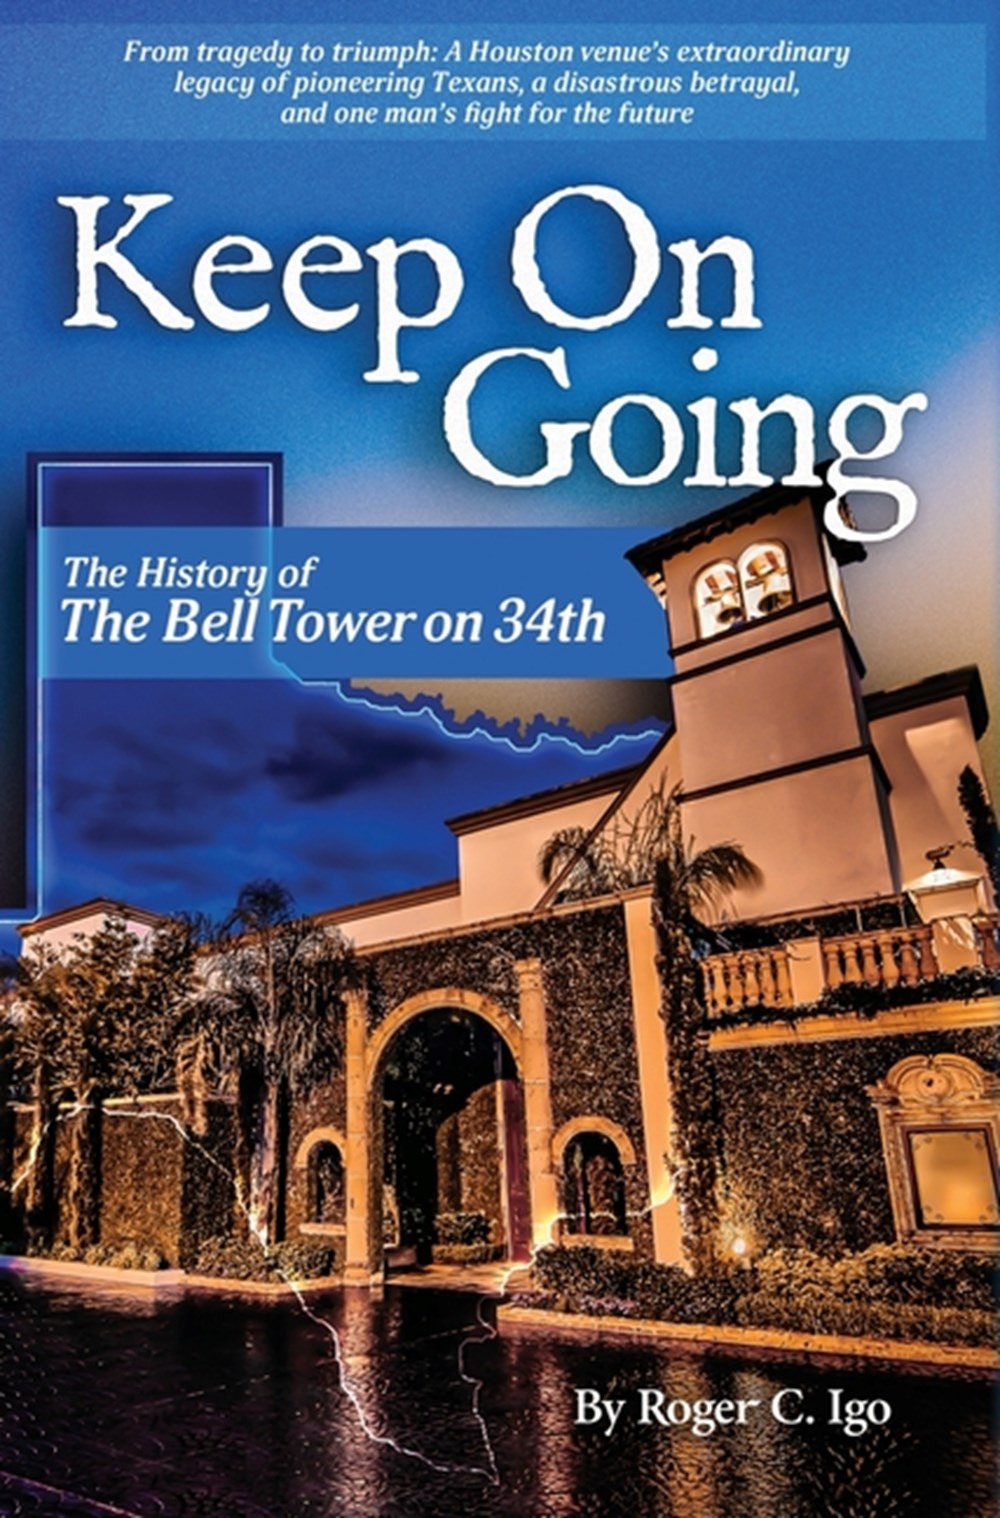 Keep On Going The History of the Bell Tower on 34th